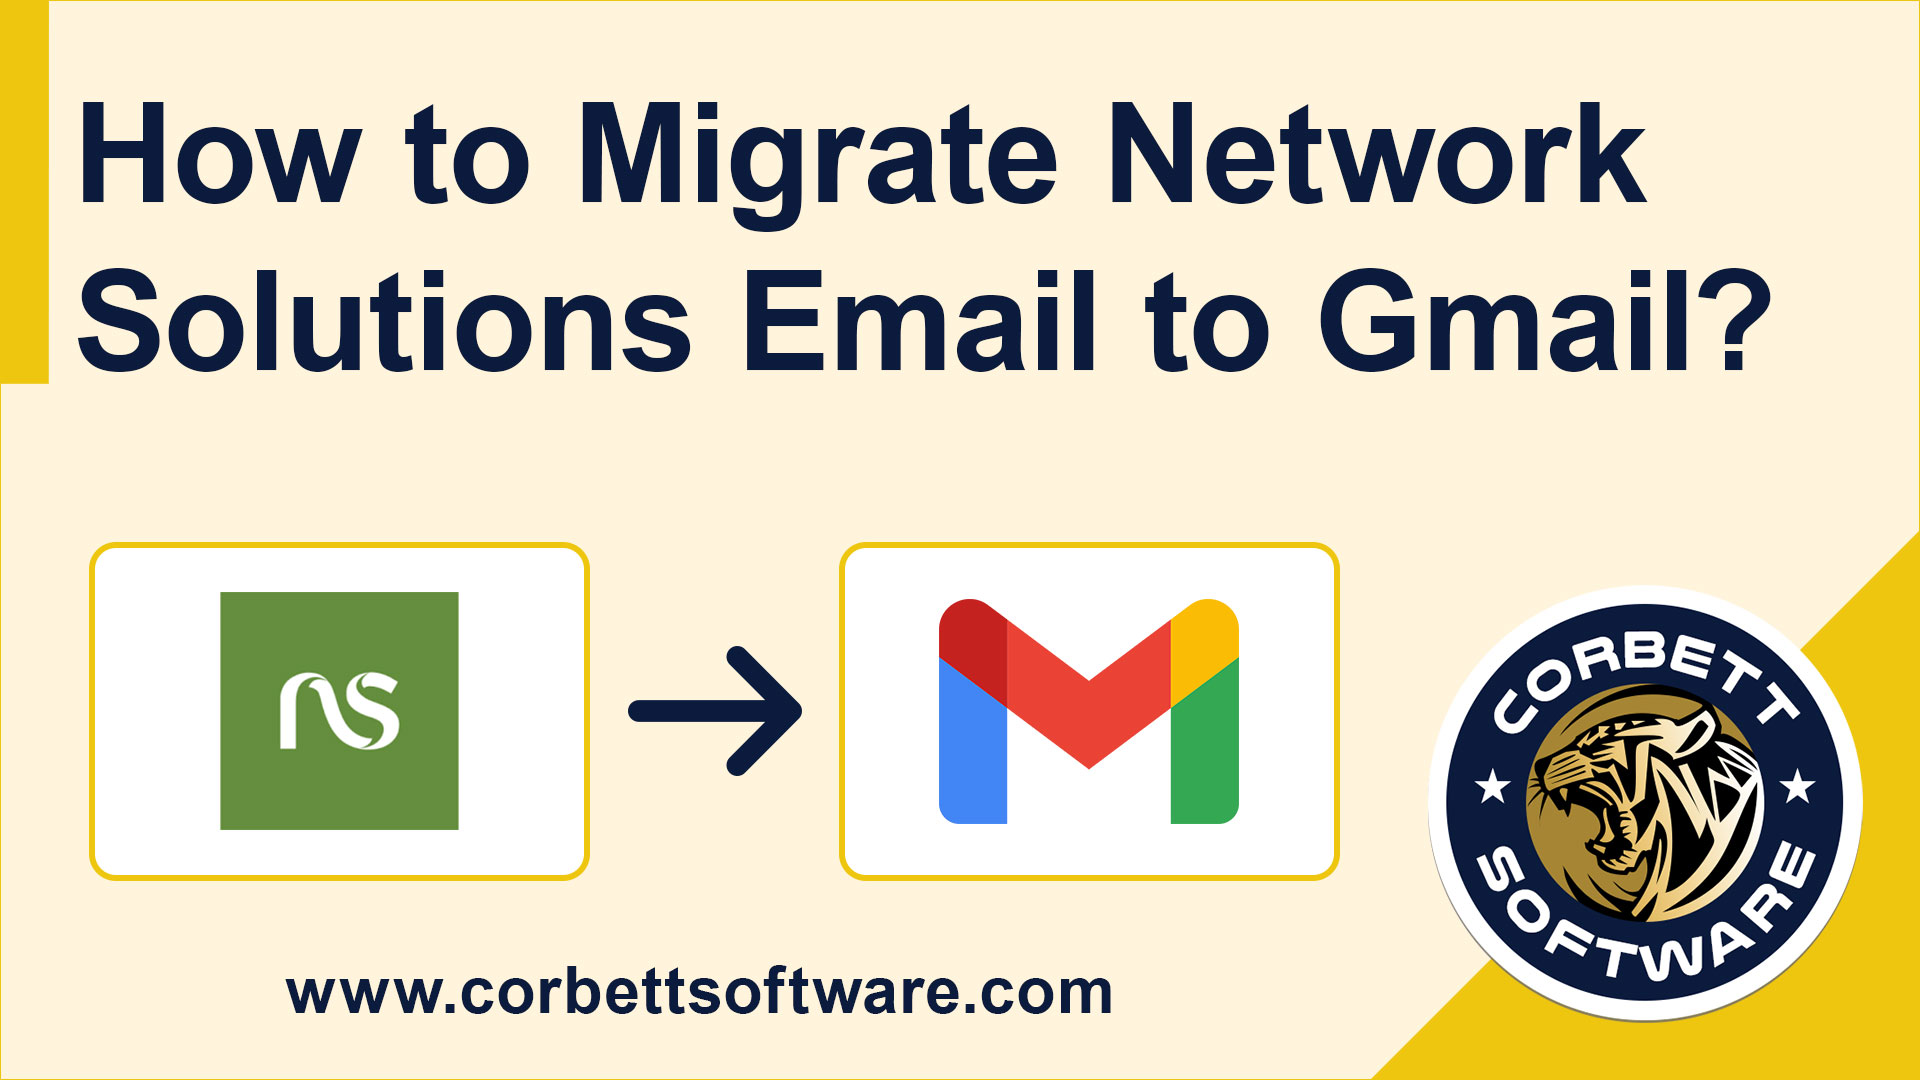 Network Solutions to Gmail